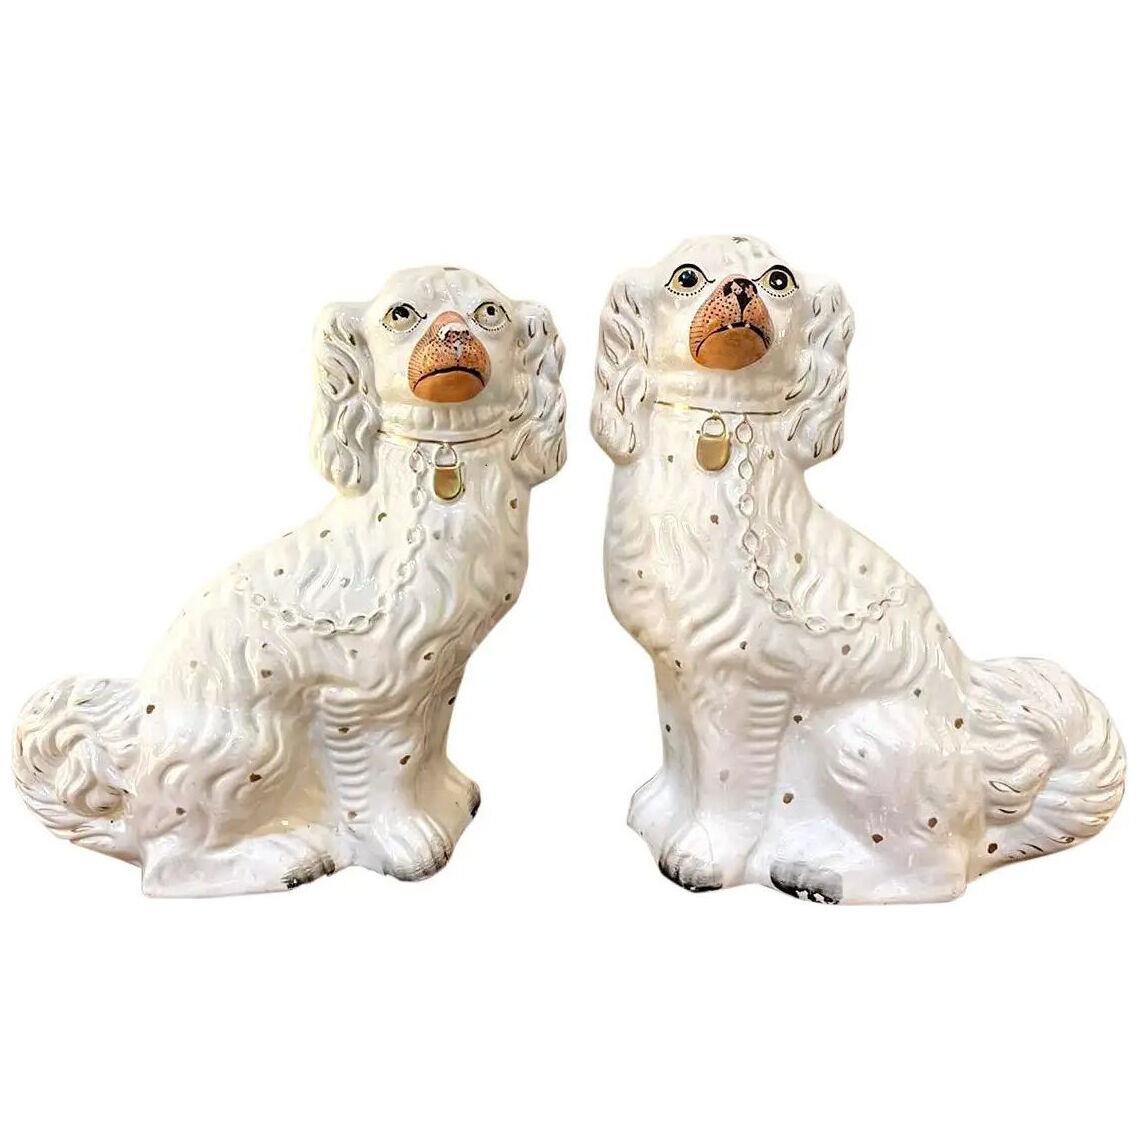 Pair of Antique Victorian White and Gold Staffordshire Dogs